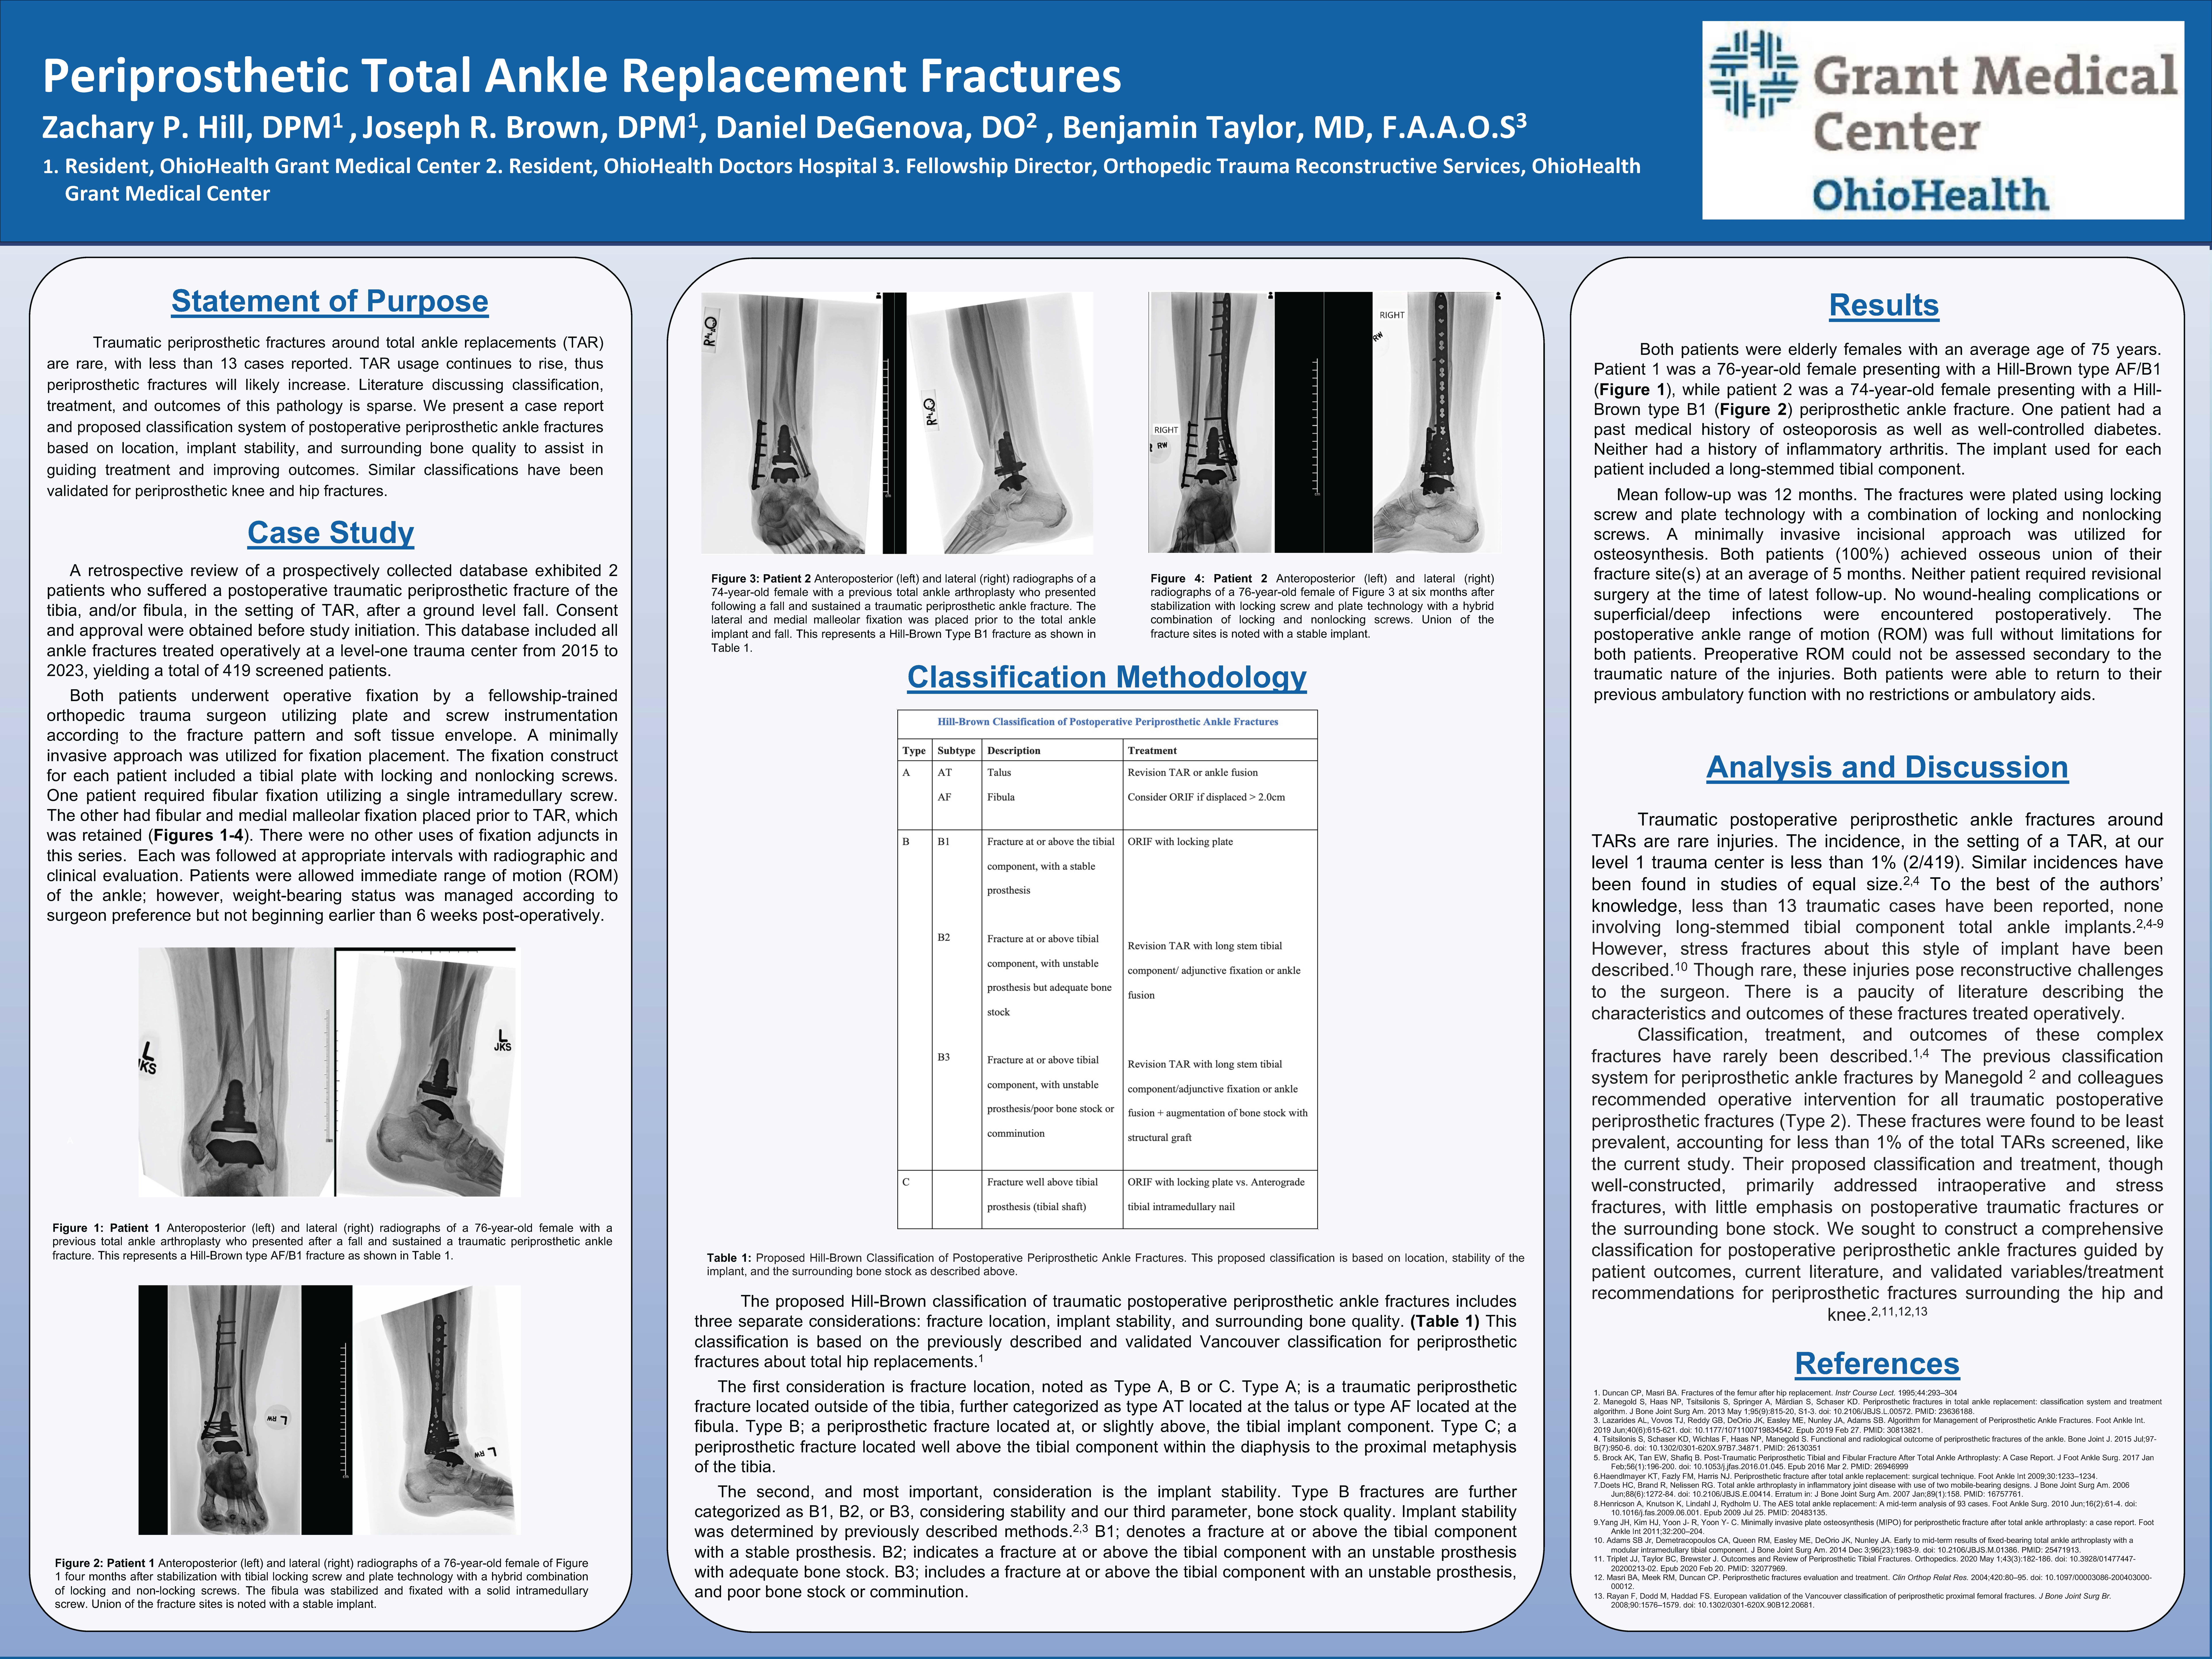 Periprosthetic Total Ankle Replacement Fractures